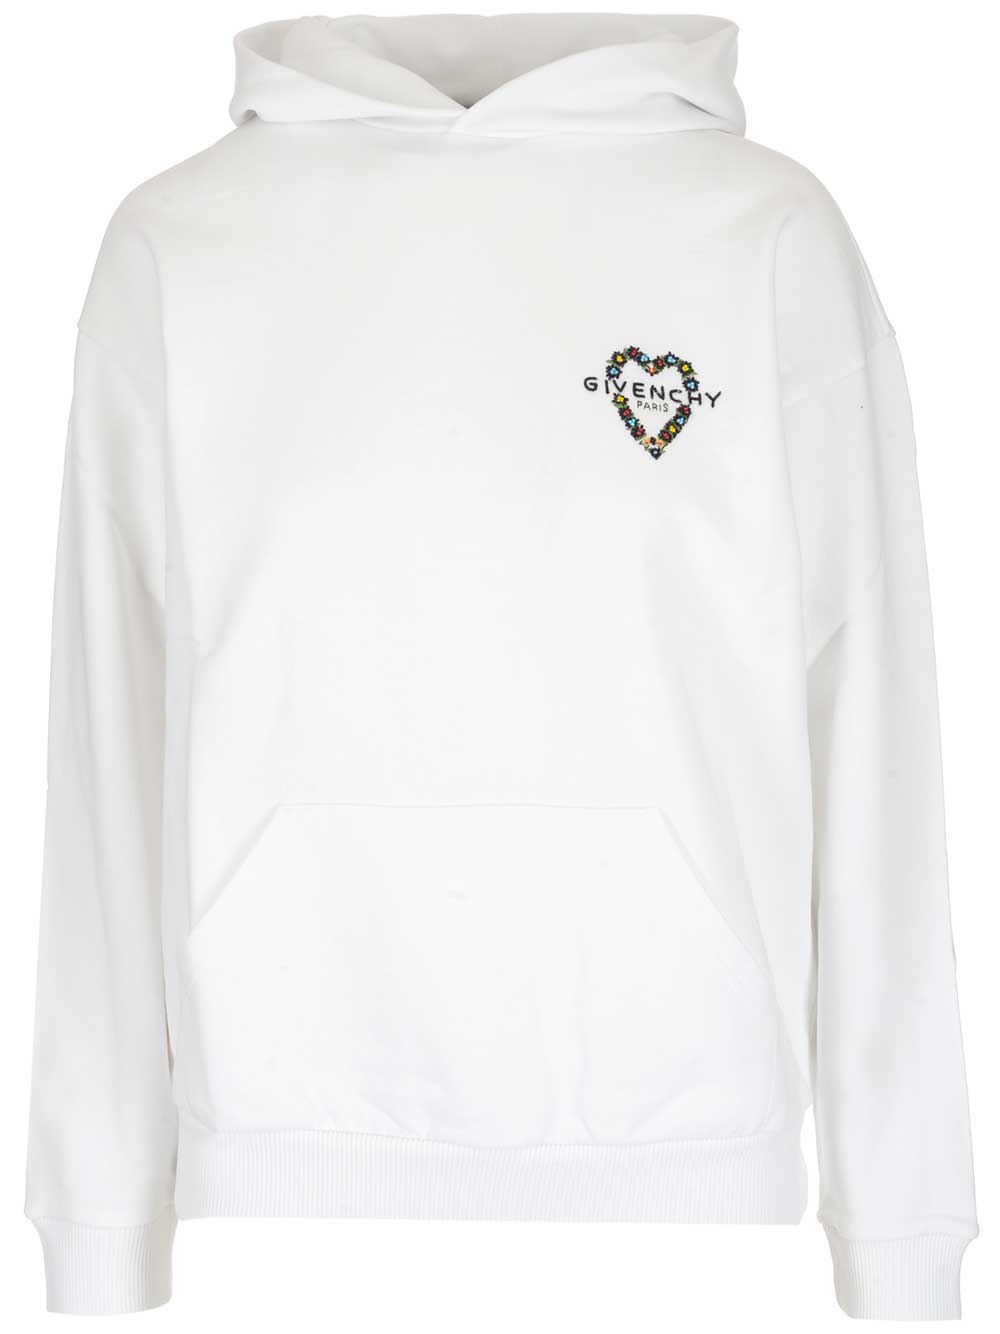 GIVENCHY GIVENCHY LOGO EMBELLISHED HOODIE